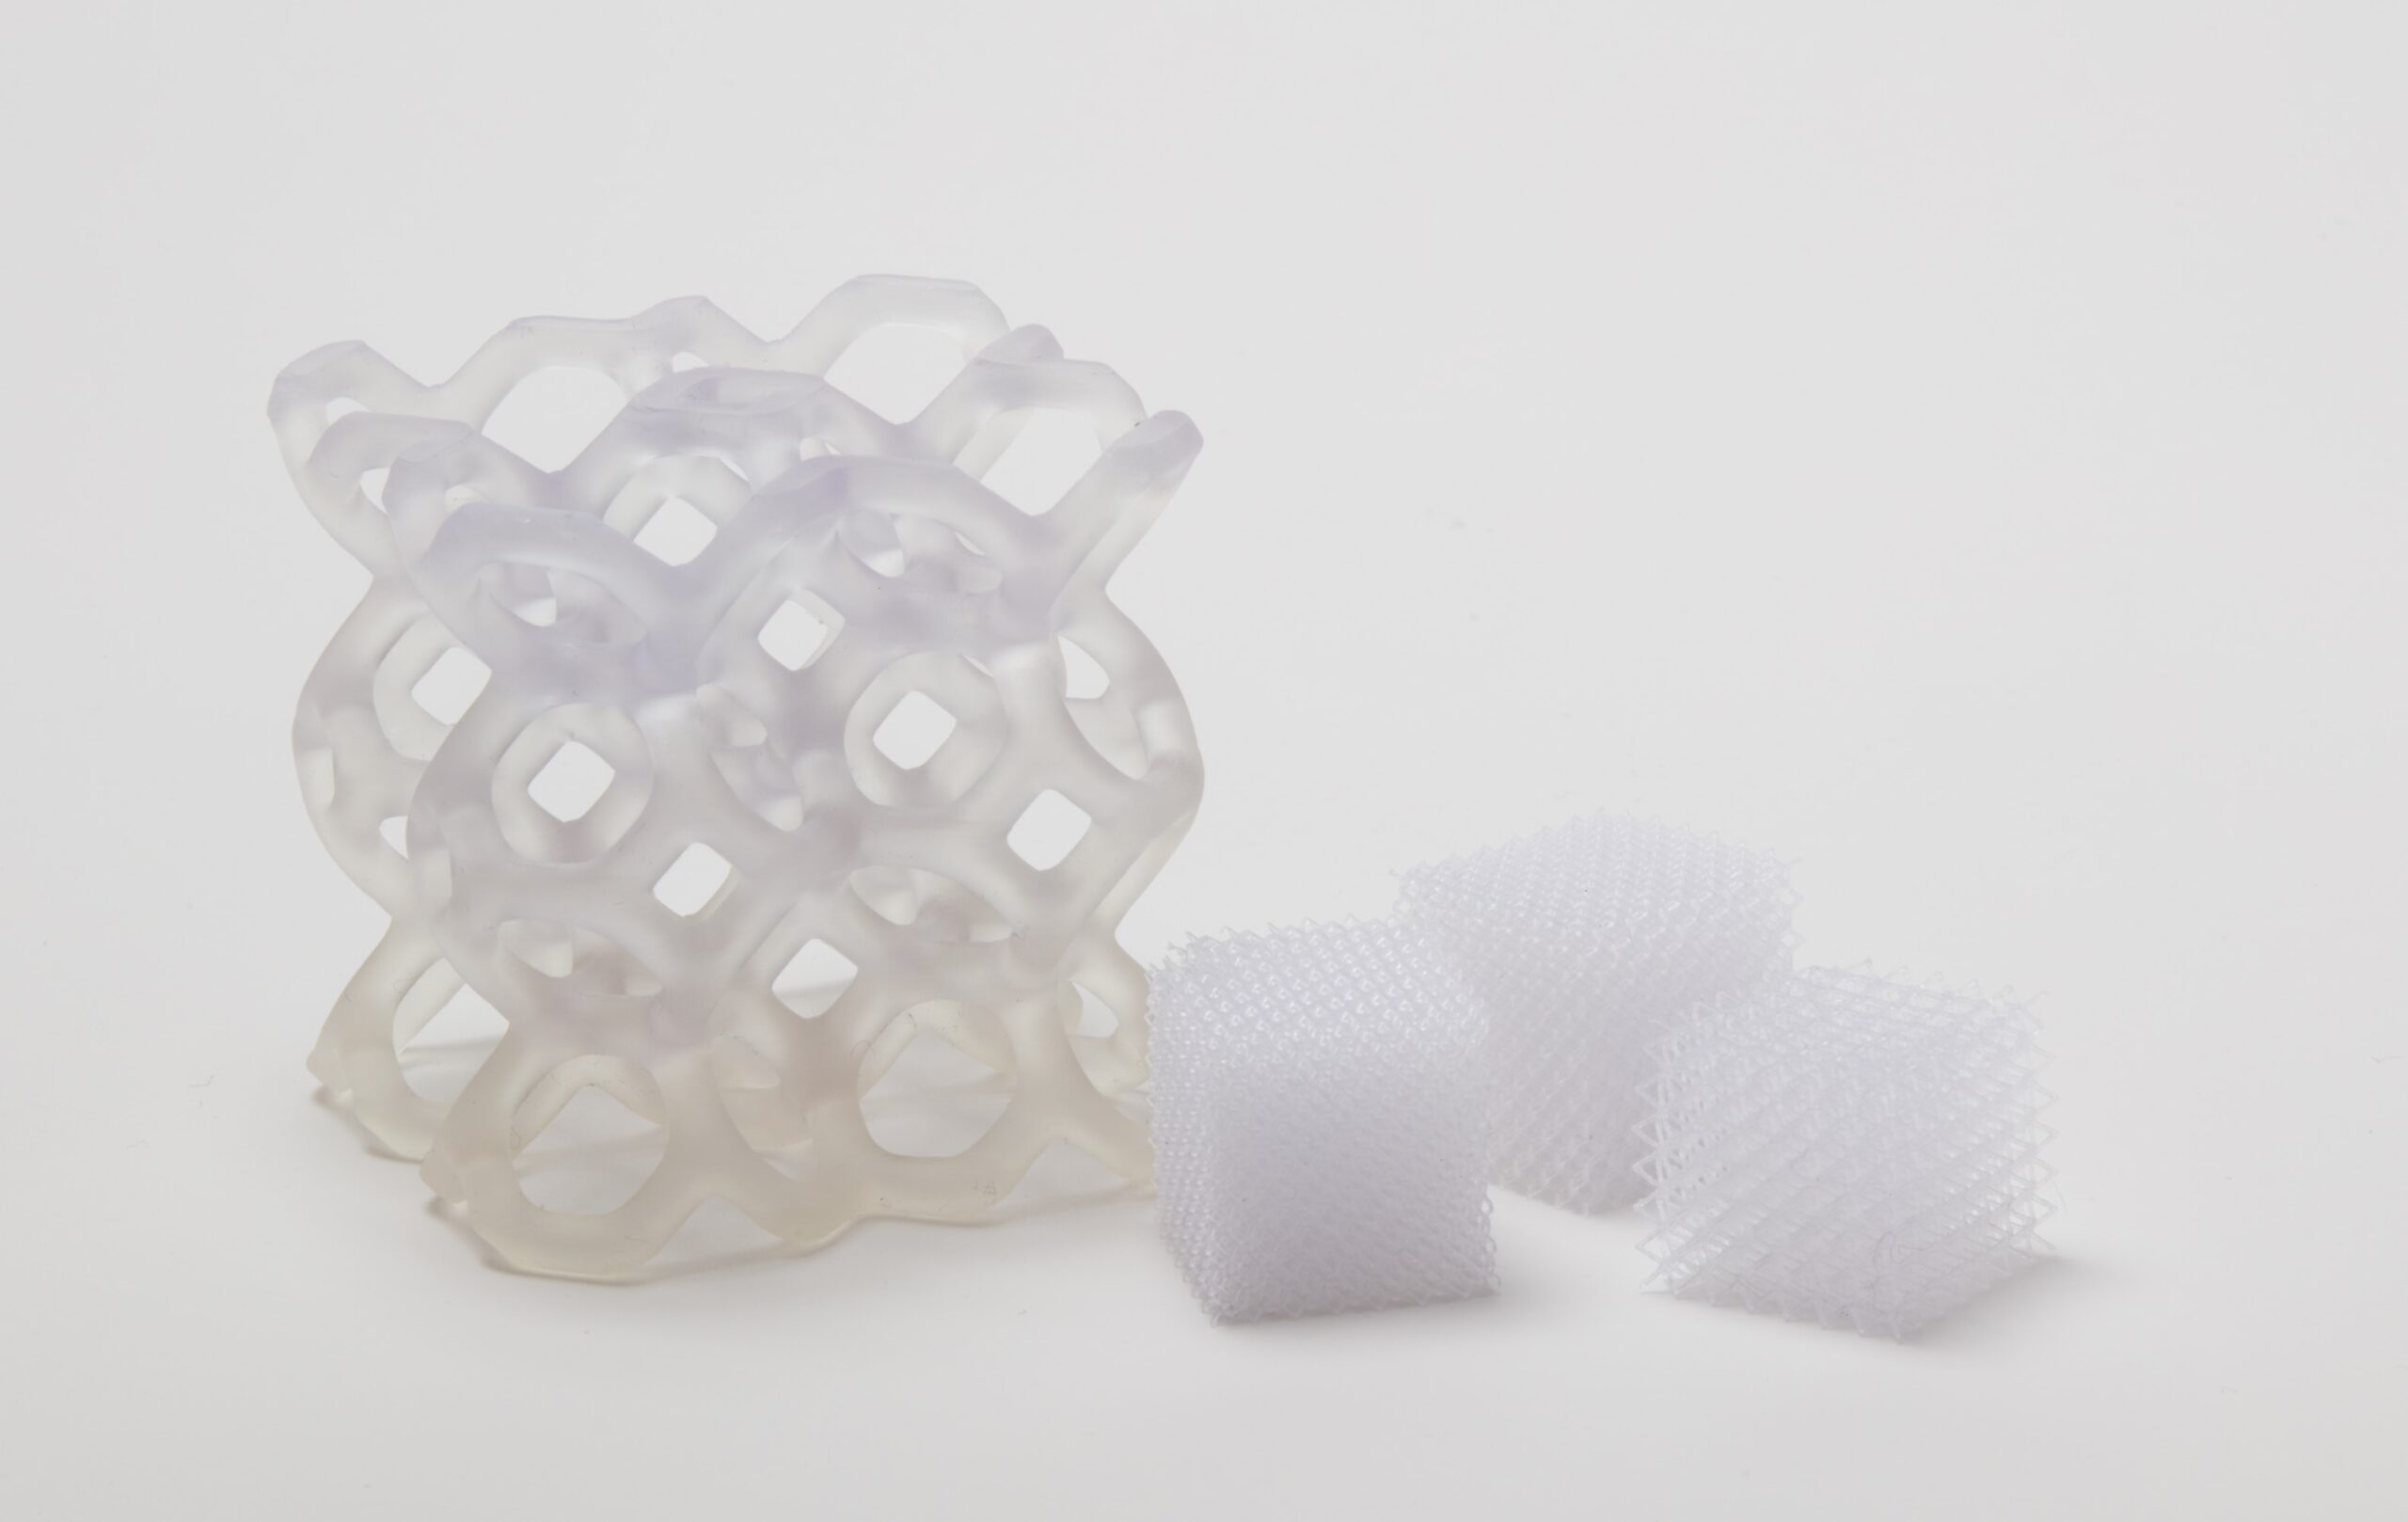 Image of transparent lattice-type cubes 3D printed with Formlabs Flexible 80A resin